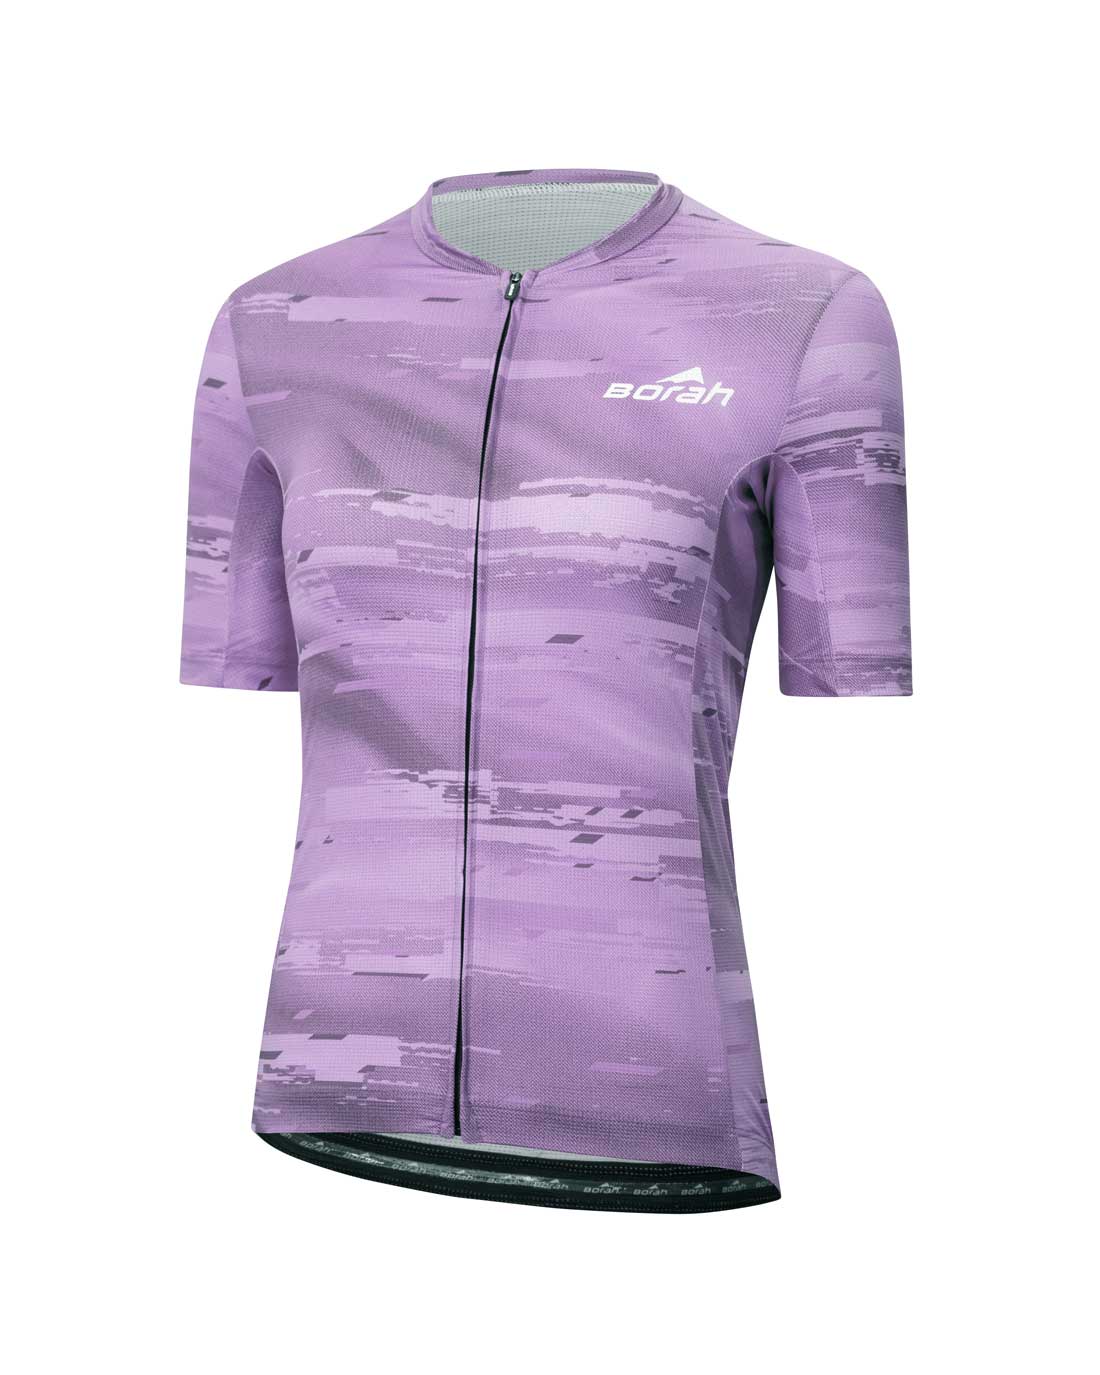 Women's OTW Cycling Jersey Front